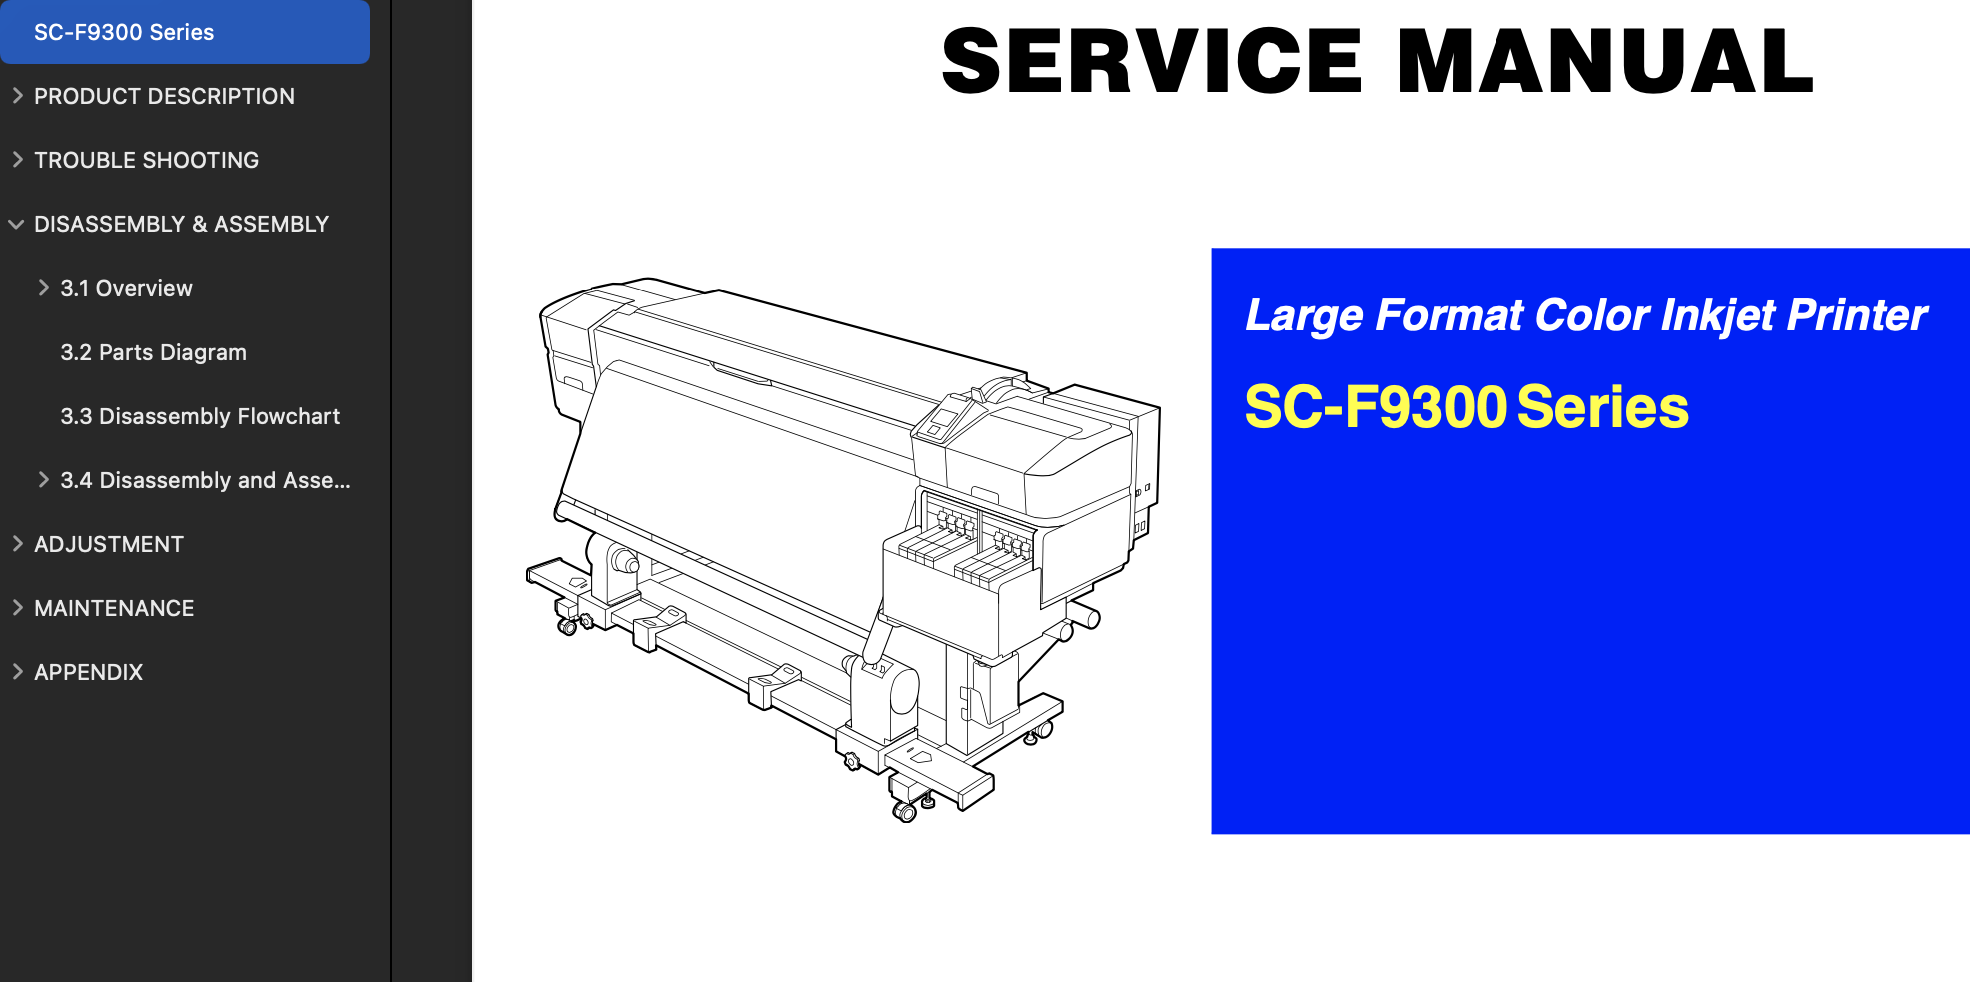 Epson Sure Color SC-F9300 Series  Service Manual, Parts List and Exploded Diagram <font color=red>New!</font>